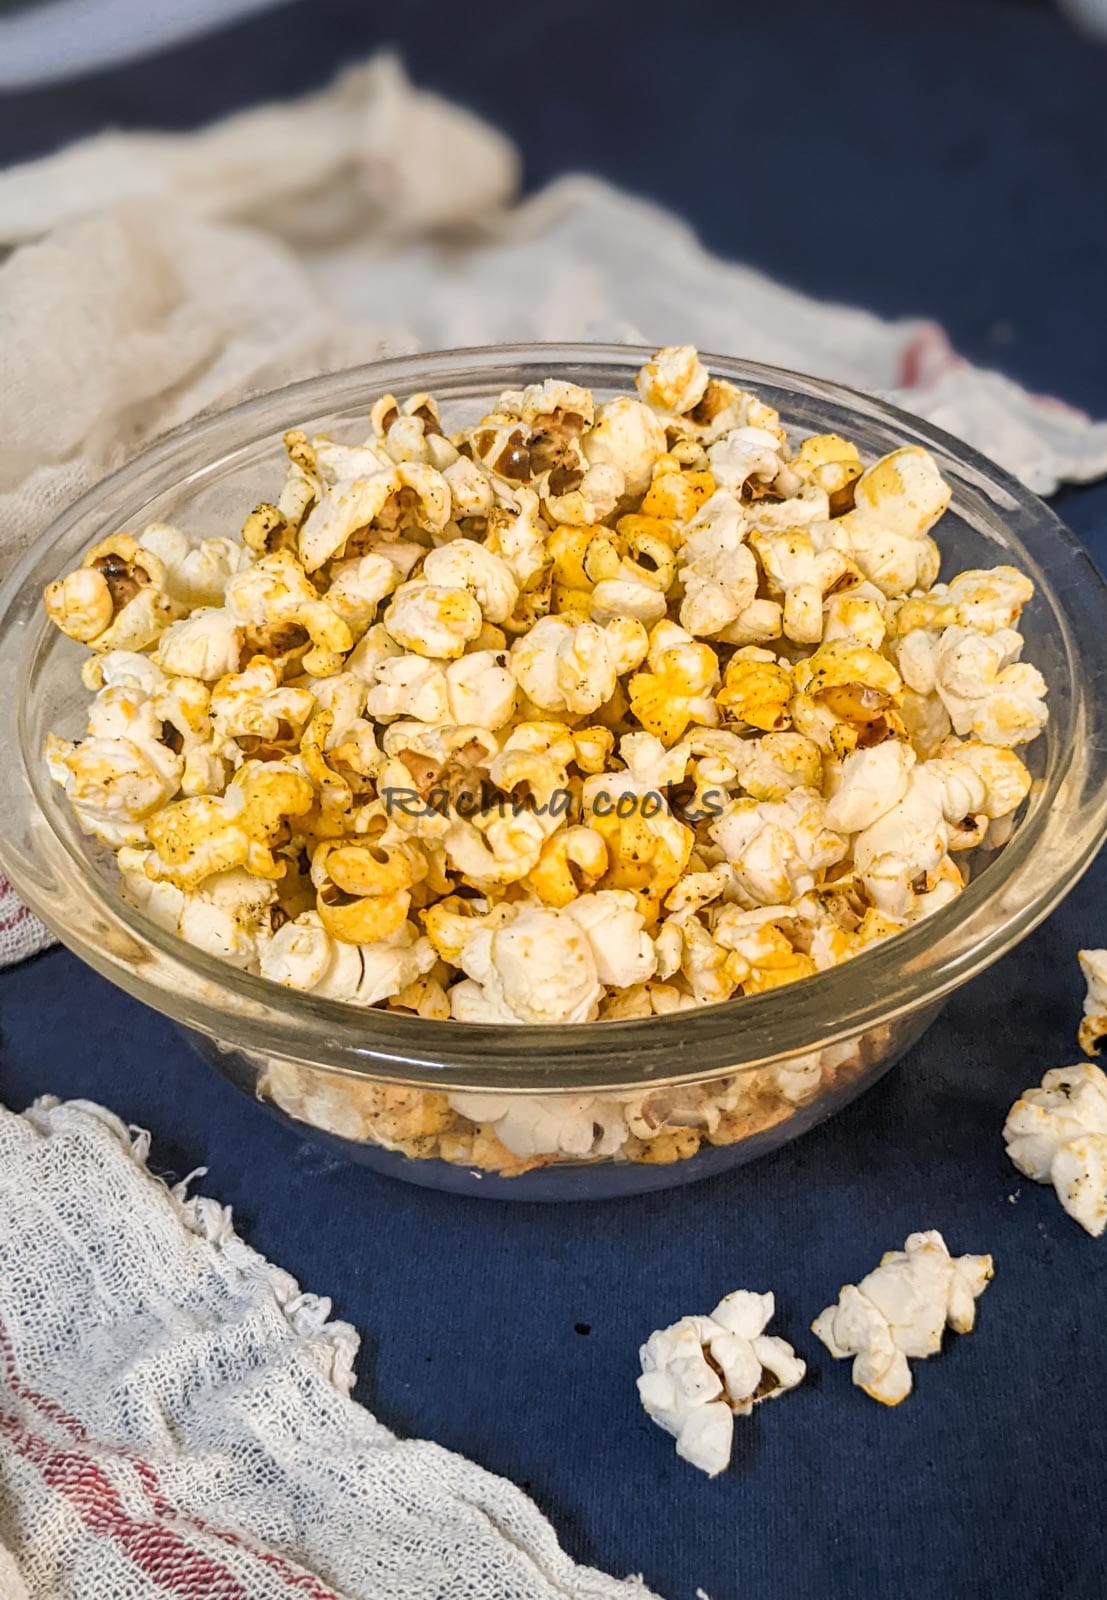 Shot of popcorn in a glass bowl with a blue background